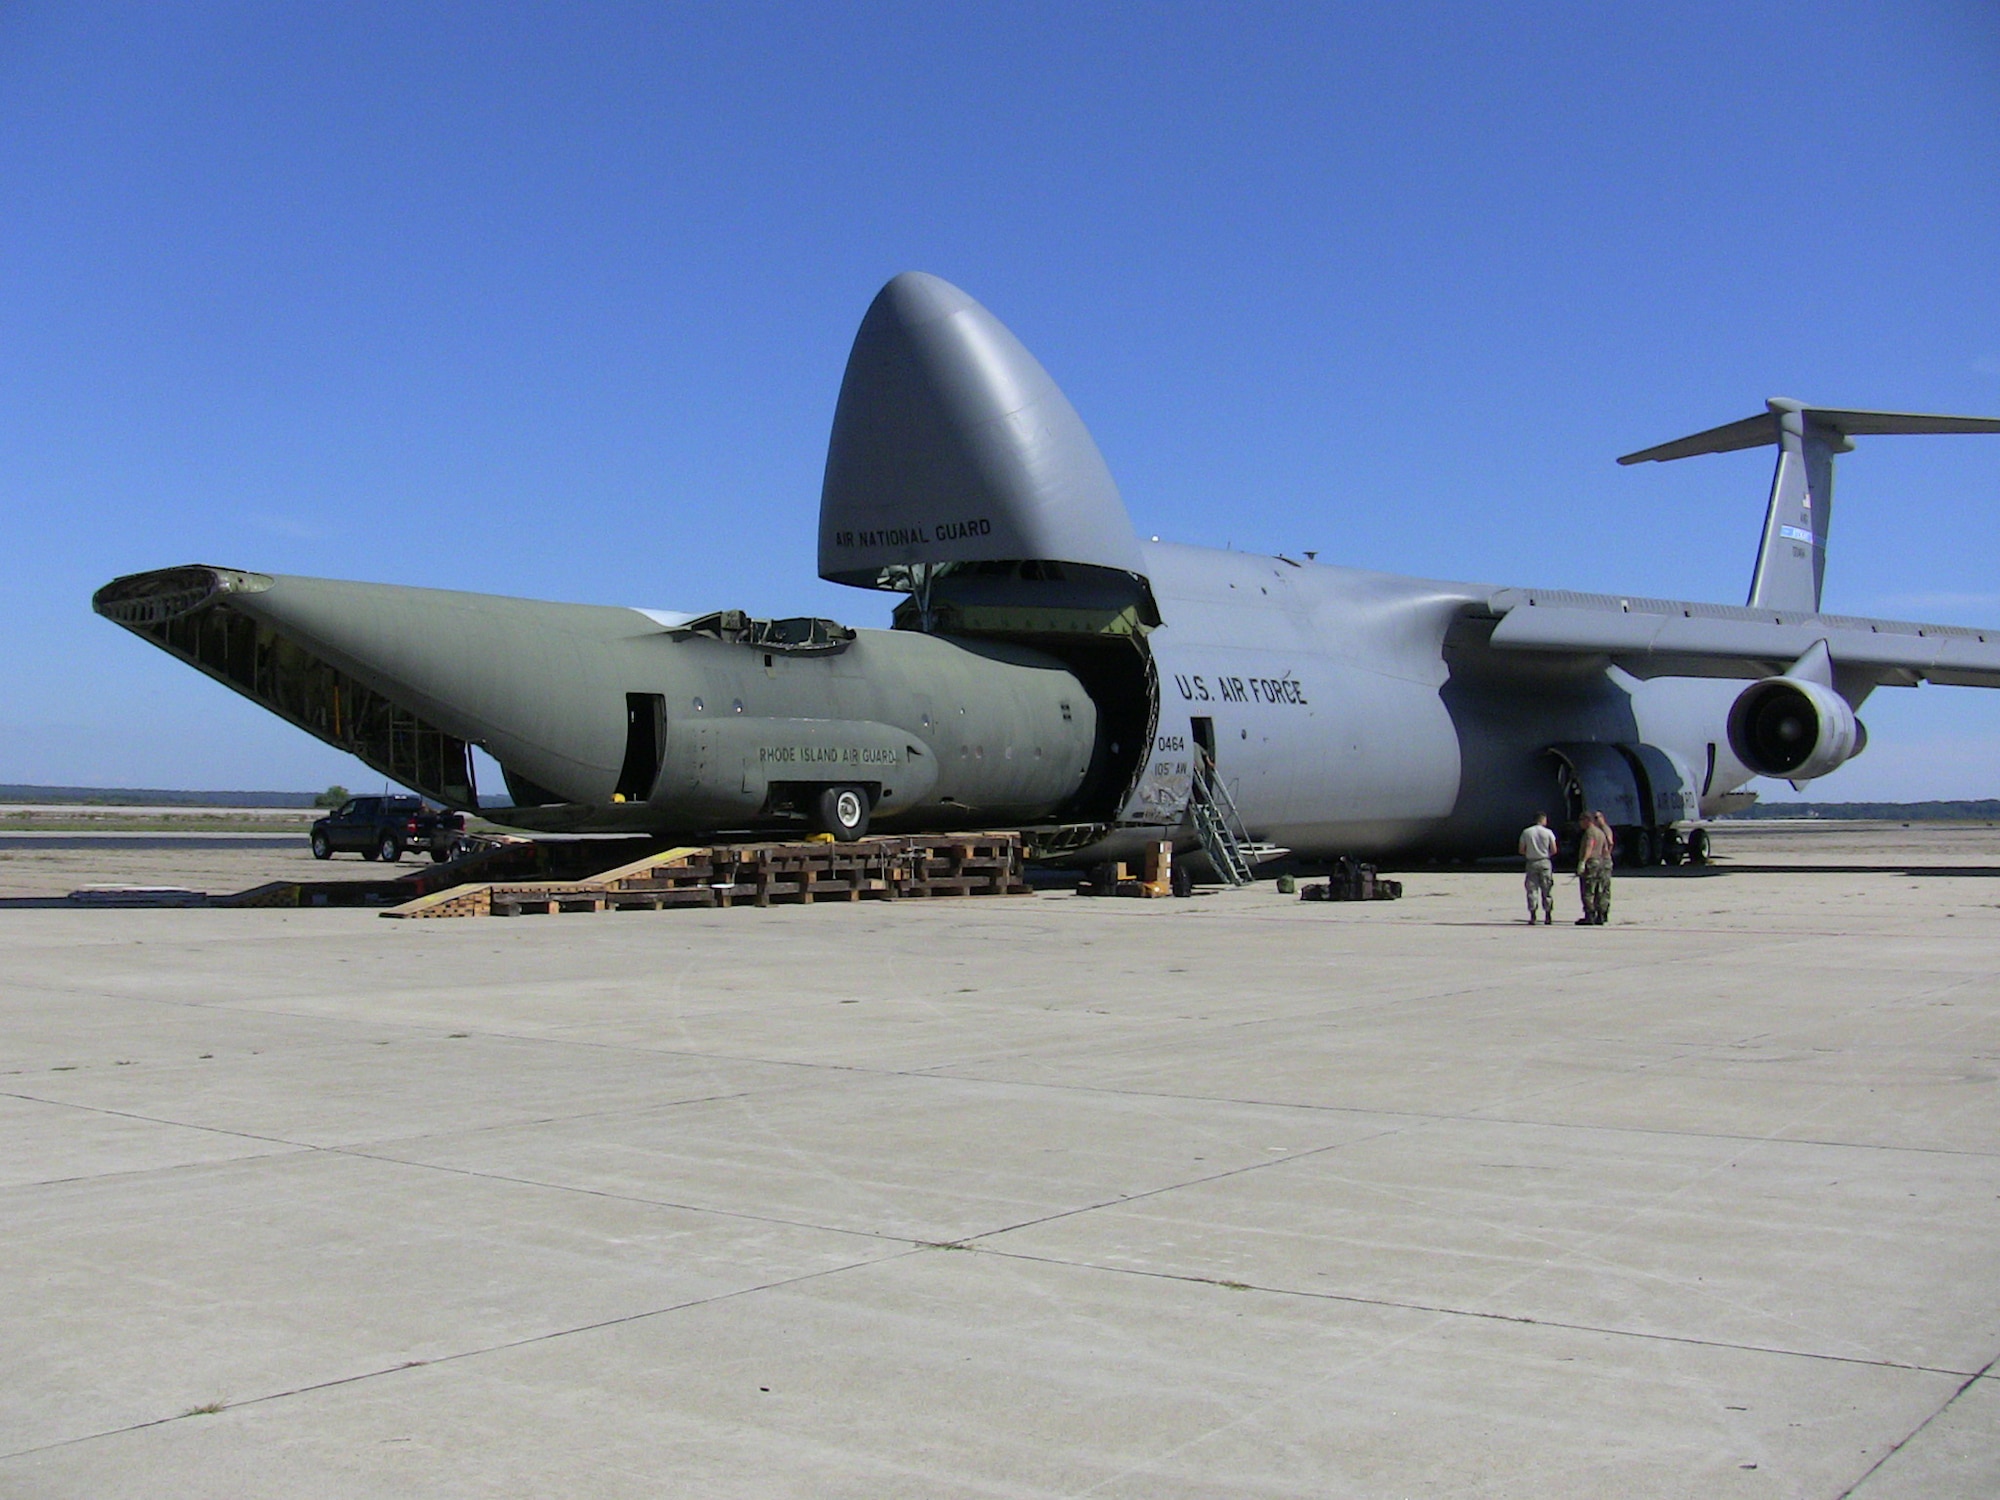 QUONSET POINT, R.I. -- A C-130 training fuselage is loaded onto a C-5 for transport to Stratton Air National Guard Base, N.Y. The New York unit will use the aircraft for training purposes. This was the first time a C-5 transported a C-130 fuselage.